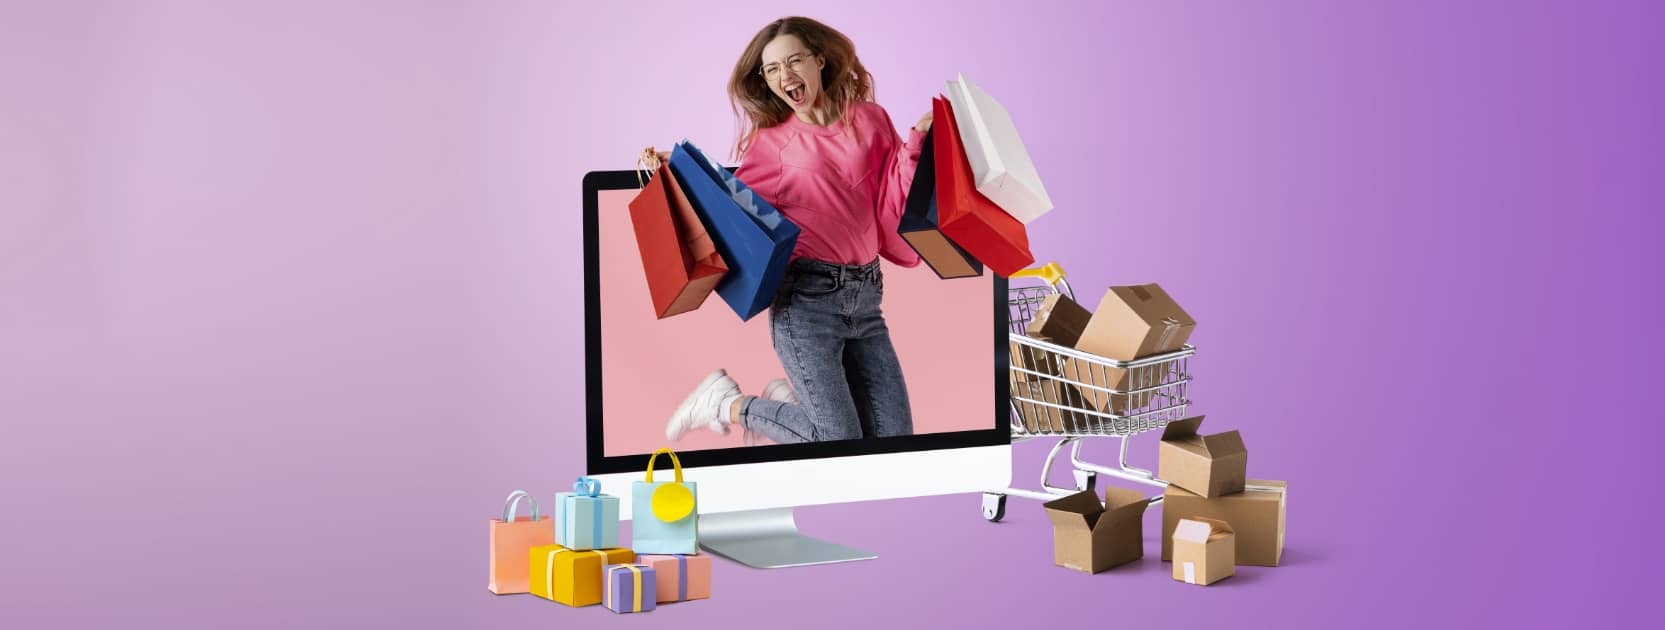 eCommerce Platform Boosted Add-To-Cart Rate